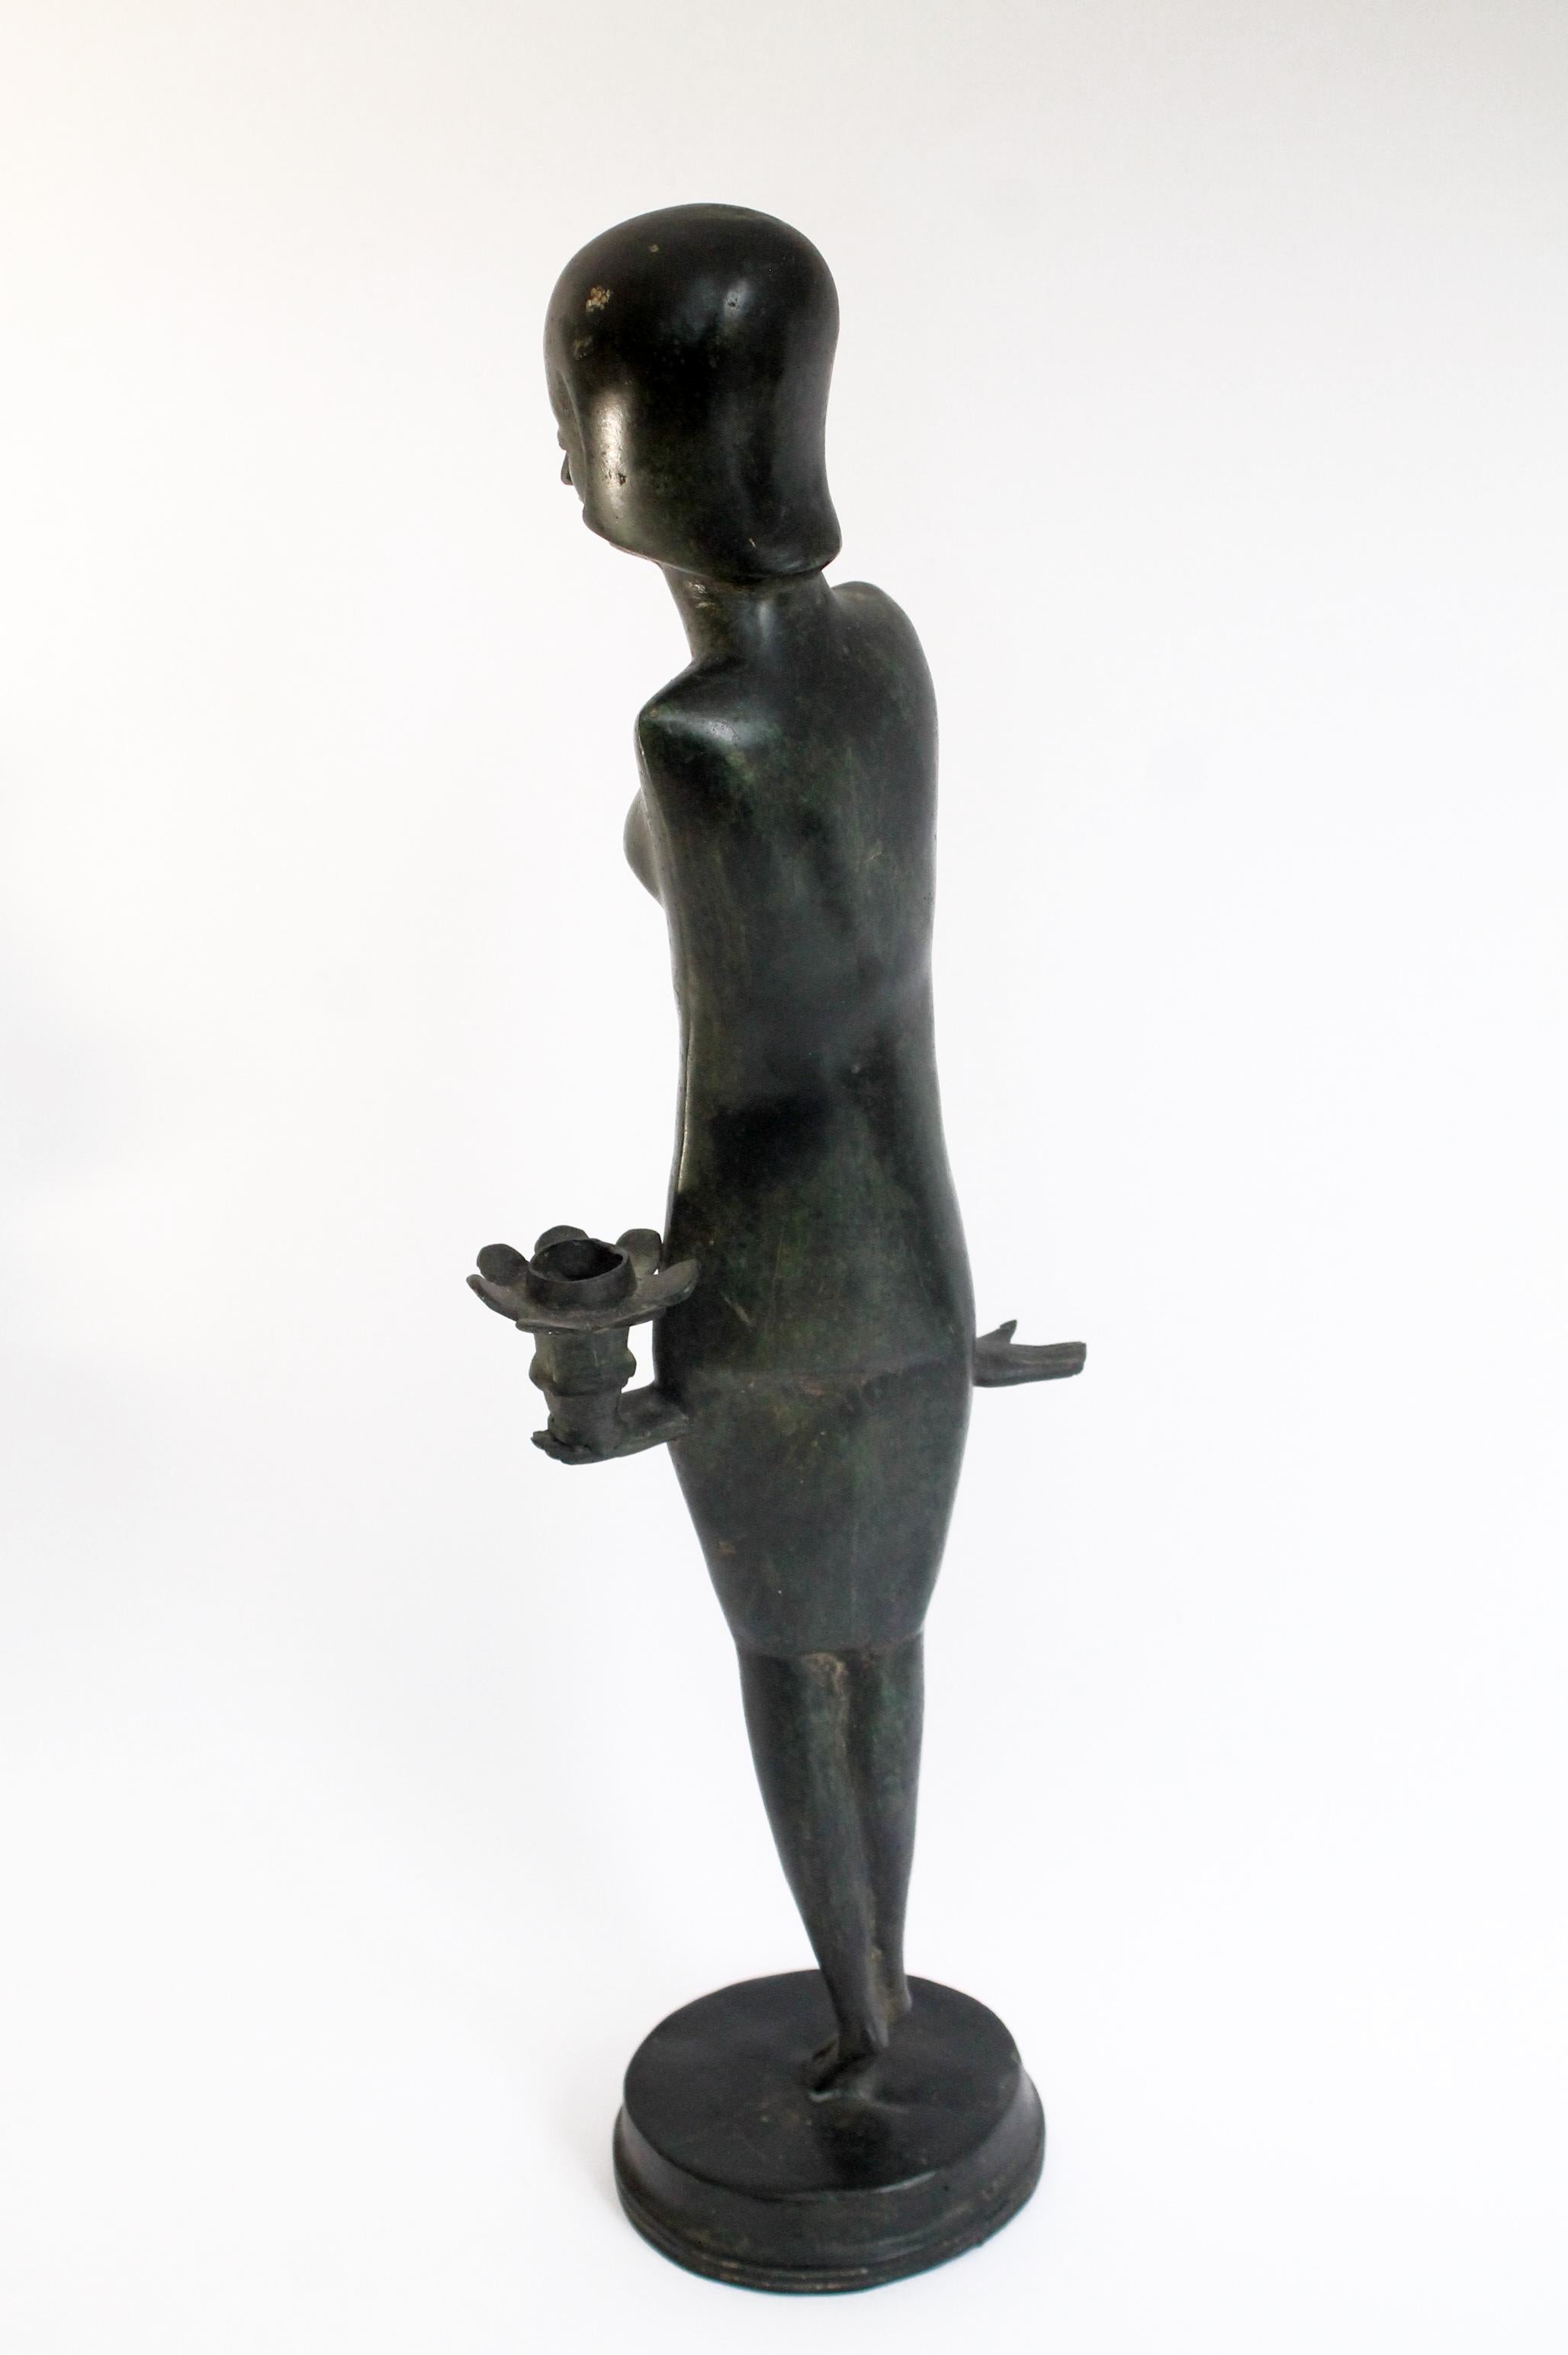 Italian Bronze mid-century modern woman sculpture
This study was attributed to the Italian well-known painter/sculptor Bruno Cassinari. 

Artist: Attributed to Bruno Cassinari
Bronze study of a woman in pose
Period. circa 1950/1960s
Artwork